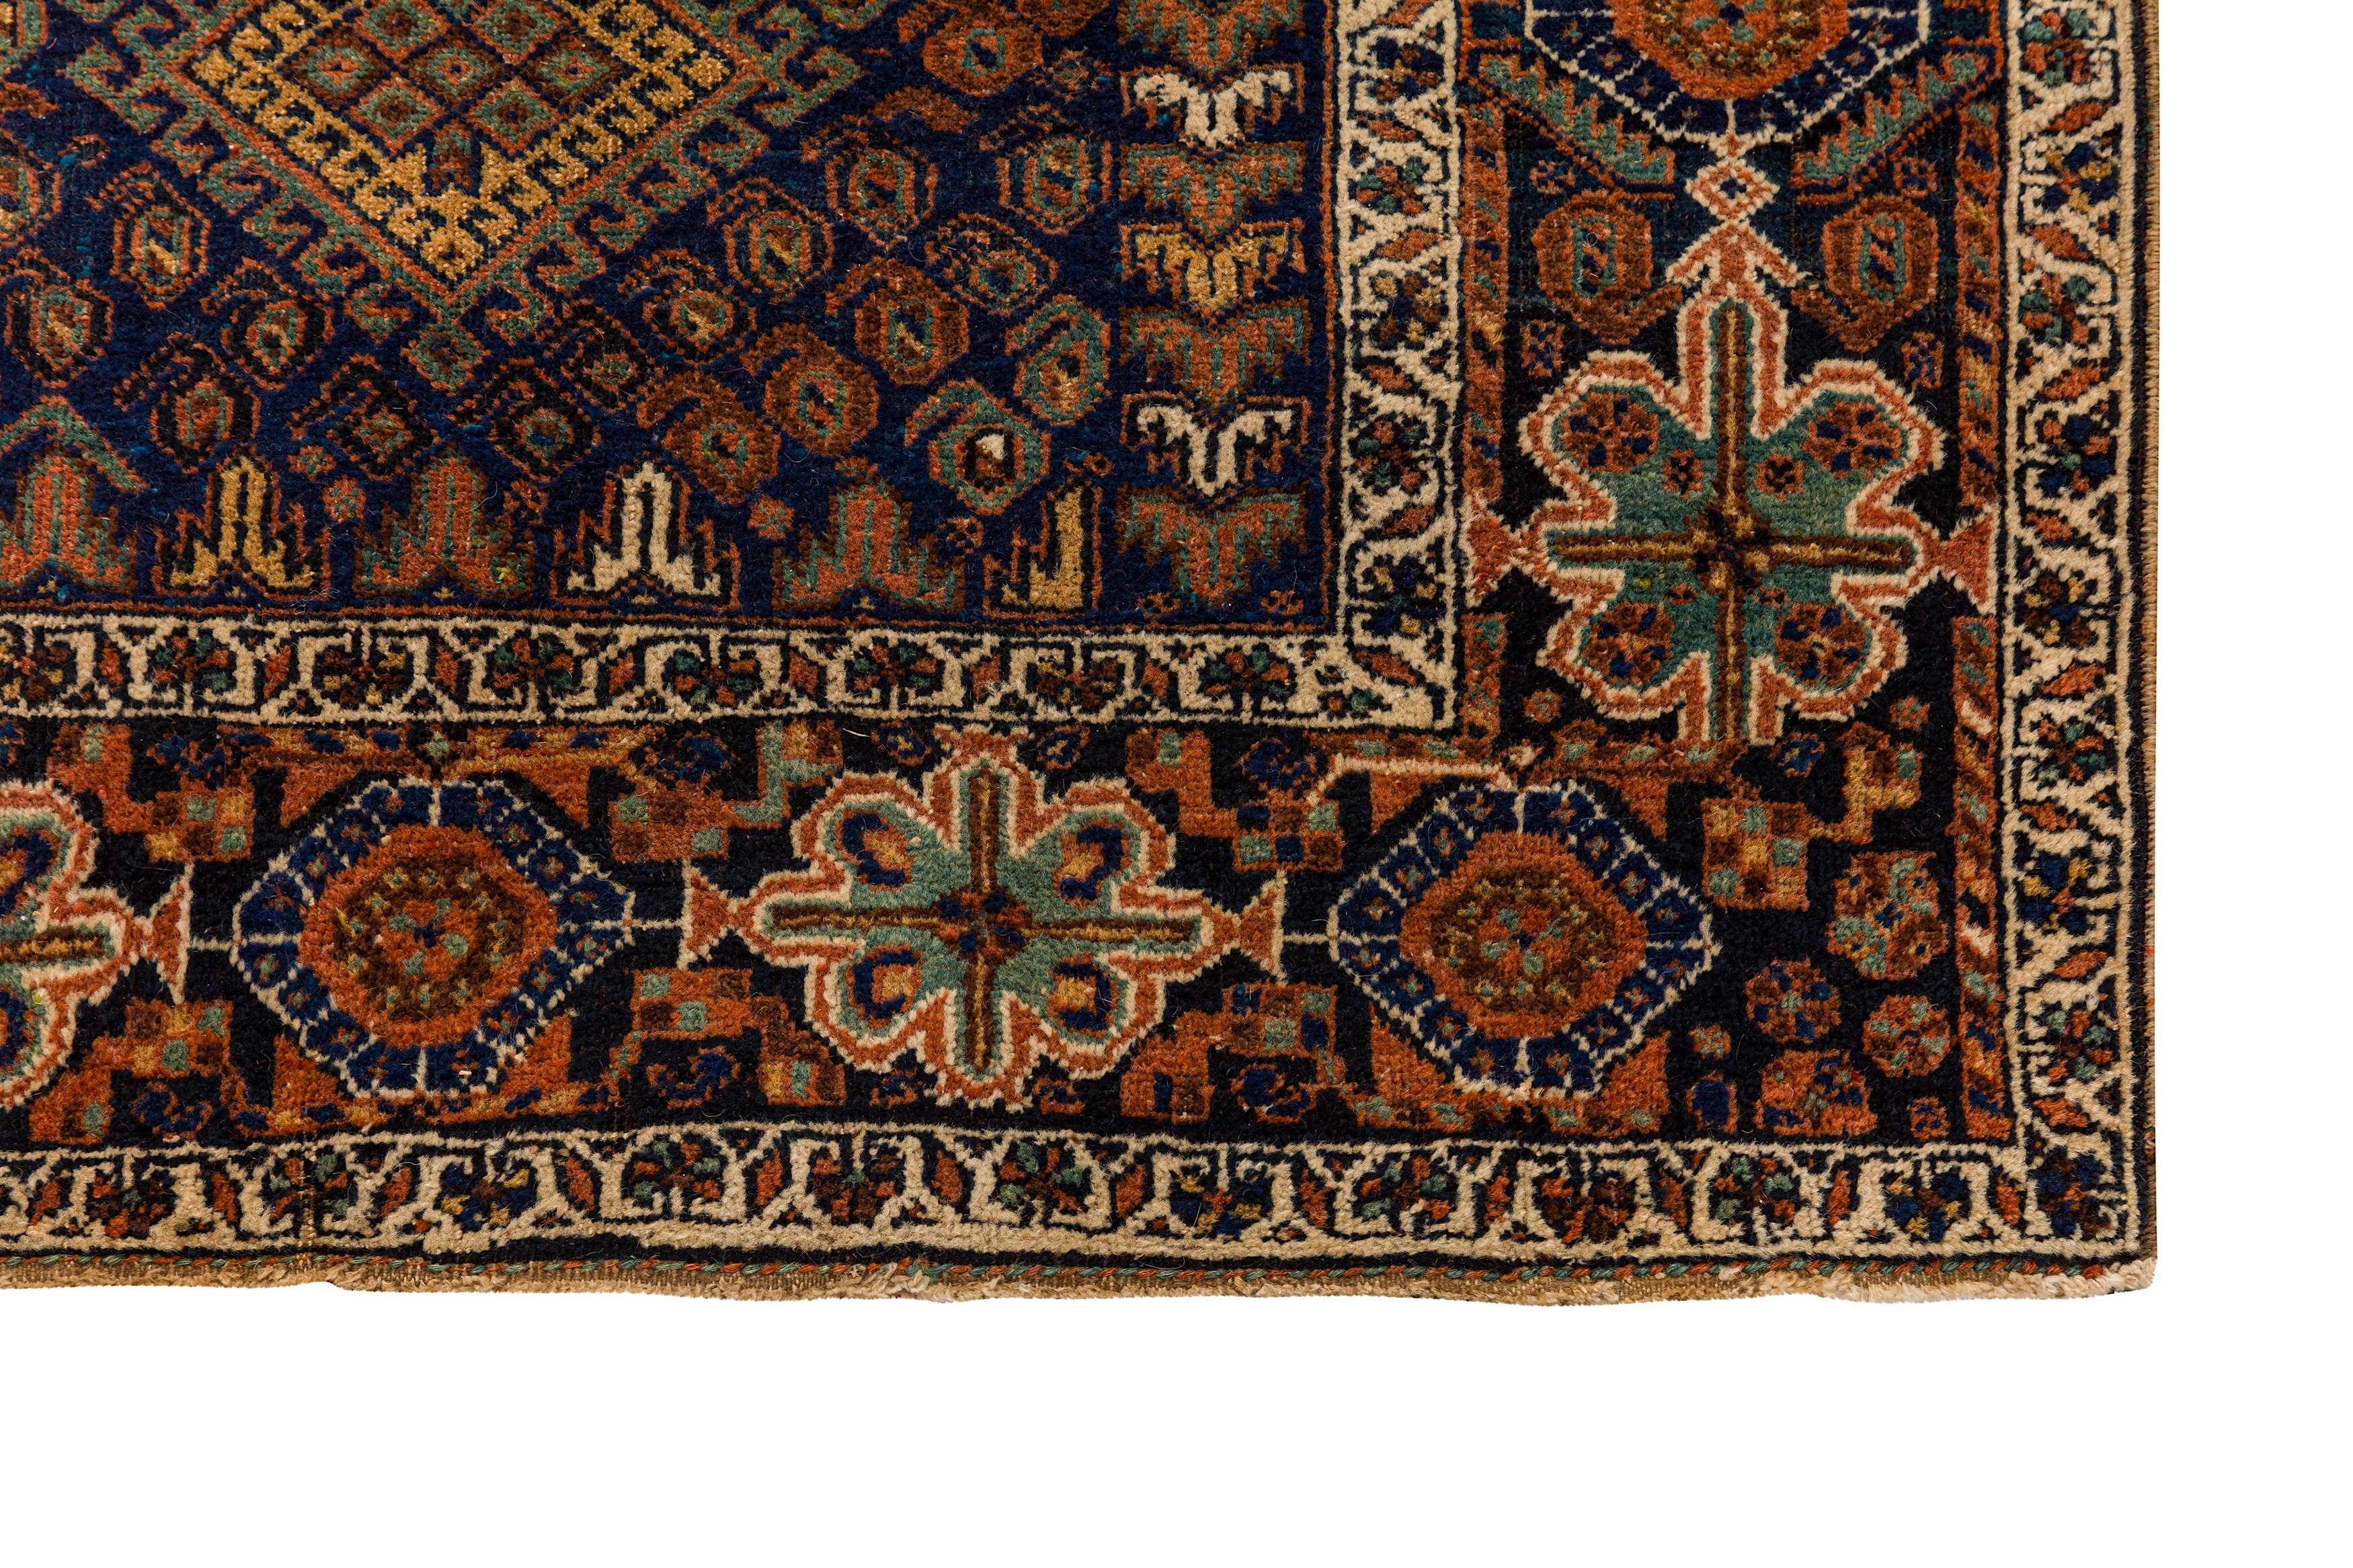 A FINE AFSHAR RUG, SOUTH-WEST PERSIA - Image 6 of 7